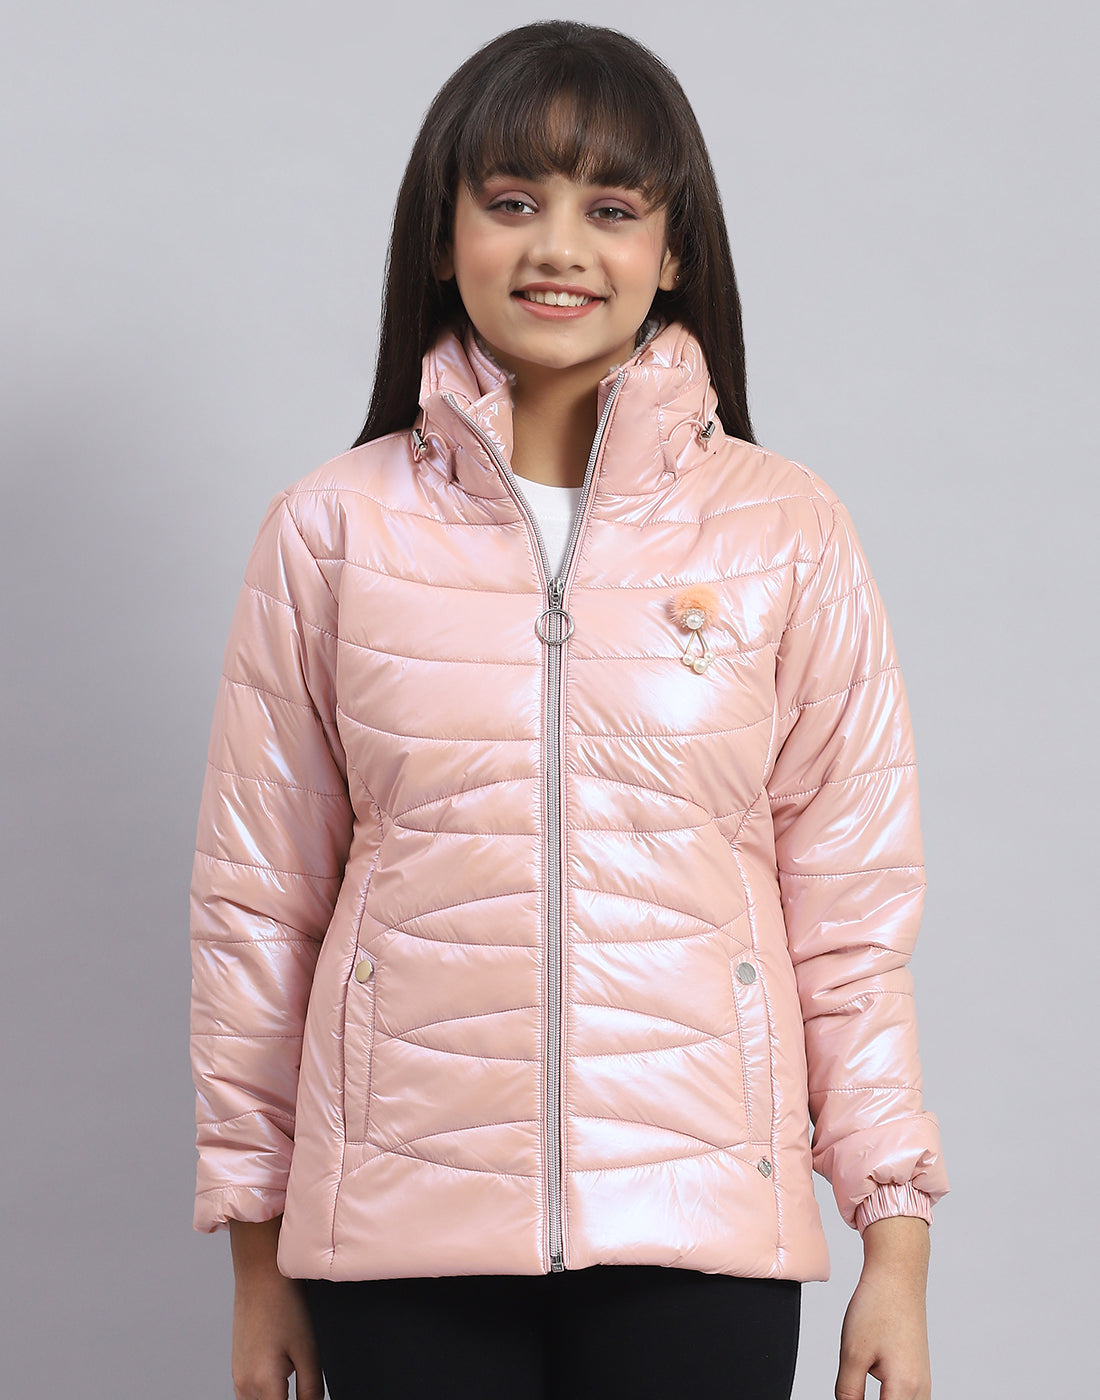 Girls Pink Solid Stand Collar Full Sleeve Girls Jacket